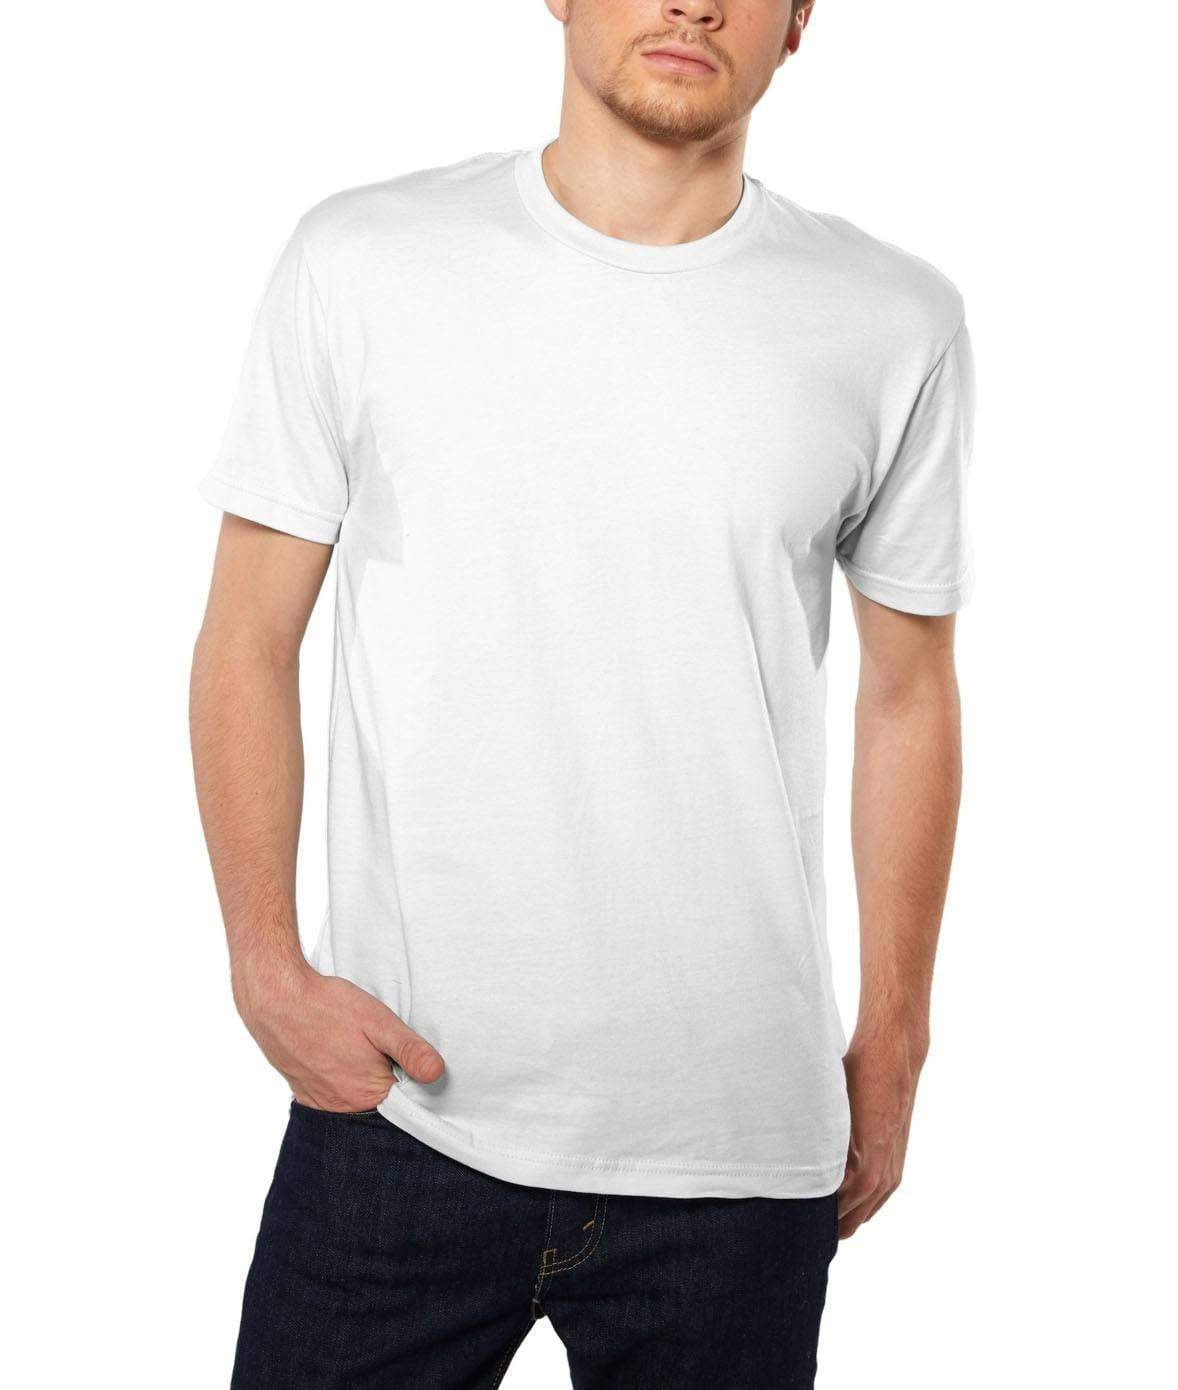 Ægte mild emne Mens Ridiculously Soft Short Sleeve Crew Neck 100% Cotton T-Shirt - Nayked  Apparel